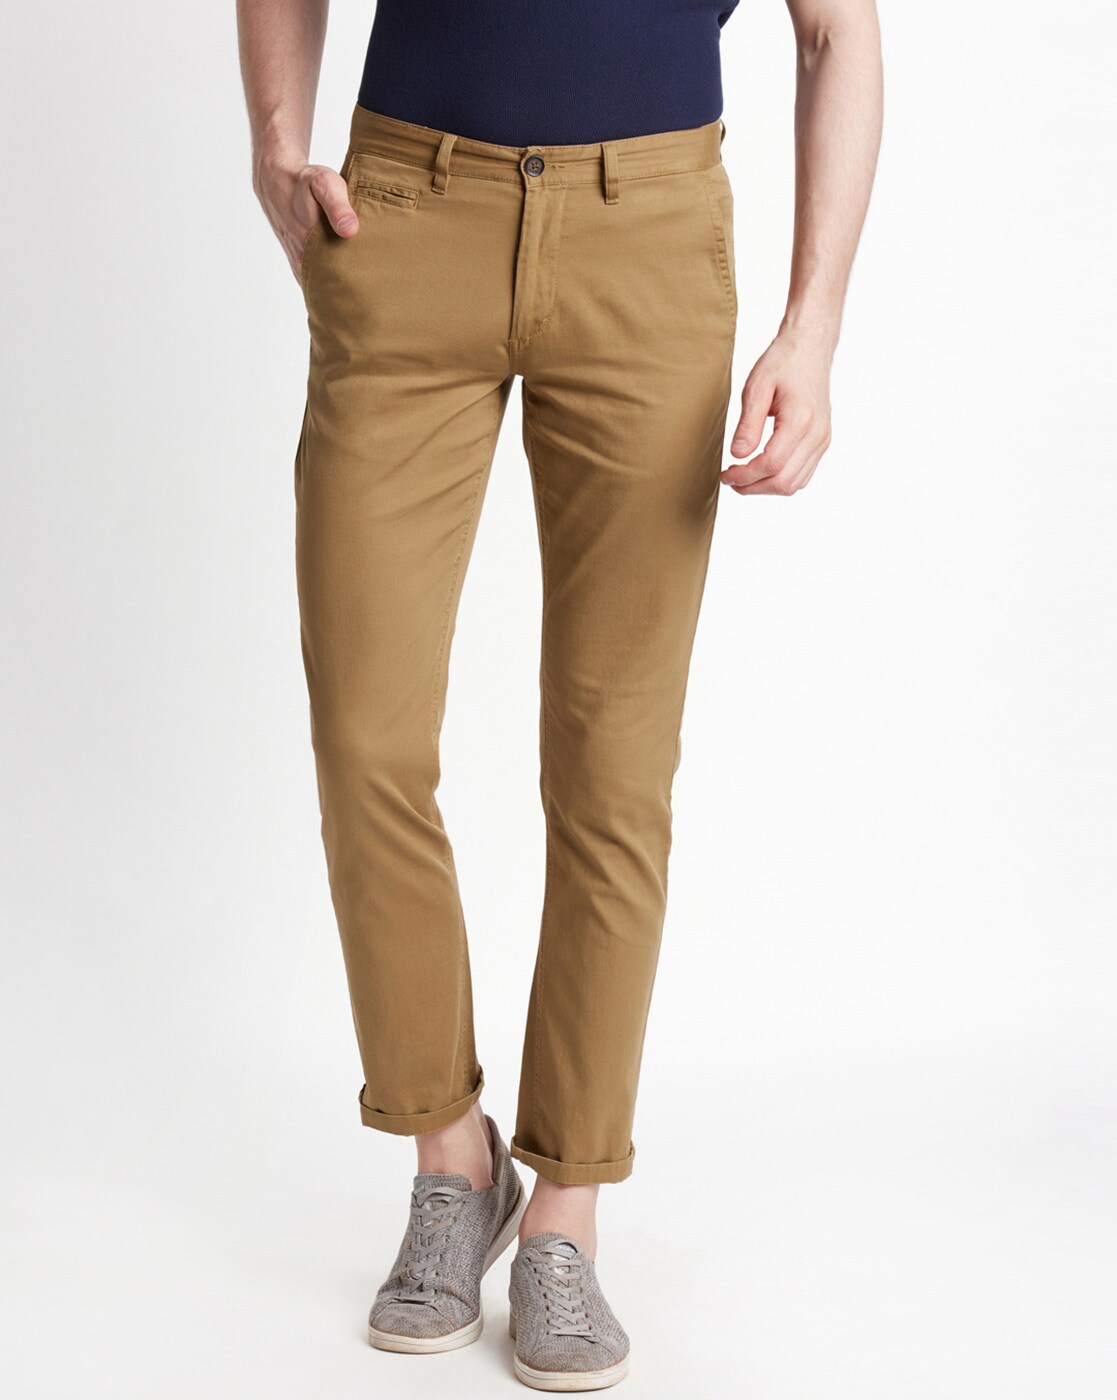 Byford by Pantaloons Olive Drab Cotton Slim Fit Texture Trousers